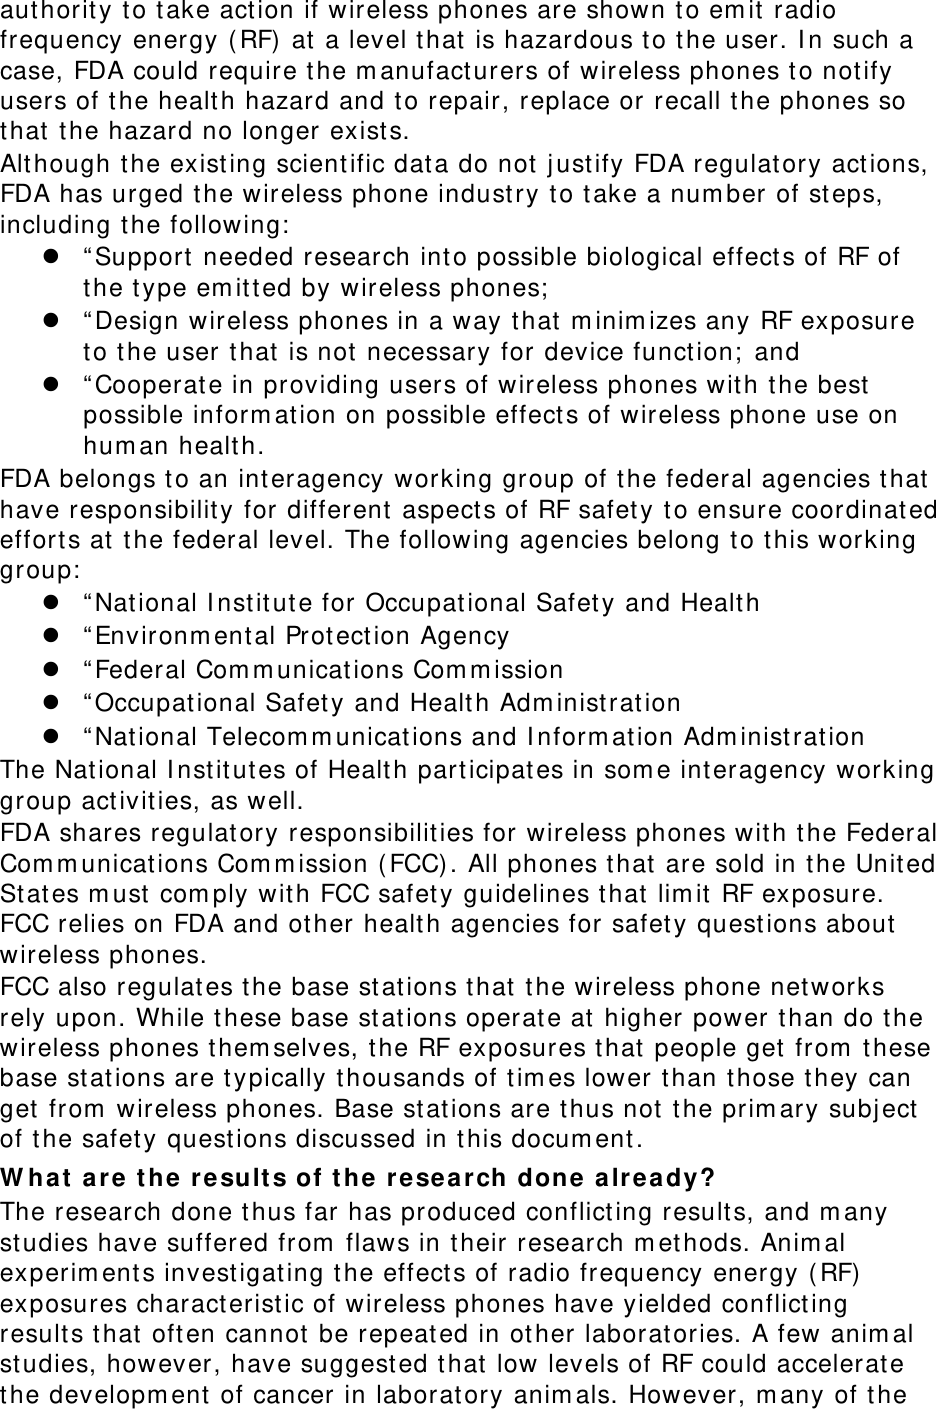 authority to take act ion if wireless phones are shown t o em it  radio frequency energy ( RF)  at a level that is hazardous to the user. I n such a case, FDA could require the m anufact urers of wireless phones t o notify users of t he health hazard and t o repair, replace or recall the phones so that t he hazard no longer exist s. Alt hough t he exist ing scientific dat a do not  j ust ify FDA regulatory actions, FDA has urged t he wireless phone indust ry to t ake a num ber of st eps, including t he following:   “ Support  needed research int o possible biological effect s of RF of the t ype em it t ed by wireless phones;   “ Design wireless phones in a way t hat  m inim izes any RF exposure to the user t hat is not necessary for device funct ion;  and  “ Cooperate in providing users of wireless phones with t he best  possible inform ation on possible effect s of wireless phone use on hum an healt h. FDA belongs to an int eragency working group of t he federal agencies that have responsibilit y for different  aspect s of RF safety to ensure coordinated efforts at the federal level. The following agencies belong t o this working group:   “ National I nst itut e for Occupat ional Safety and Healt h  “ Environm ental Prot ect ion Agency  “ Federal Com m unications Com m ission  “ Occupational Safety and Health Adm inistration  “ National Telecom m unications and I nform ation Adm inist ration The National I nst itut es of Healt h participates in som e interagency working group act ivities, as well. FDA shares regulatory responsibilities for wireless phones with t he Federal Com m unications Com m ission (FCC). All phones that are sold in the United St ates m ust com ply with FCC safet y guidelines t hat lim it RF exposure. FCC relies on FDA and other healt h agencies for safet y quest ions about  wireless phones. FCC also regulates the base stat ions that the wireless phone networks rely upon. While t hese base st at ions operate at higher power than do the wireless phones them selves, the RF exposures that people get  from  t hese base stat ions are t ypically t housands of t im es lower than those t hey can get from  wireless phones. Base st ations are thus not  t he prim ary subject  of t he safety quest ions discussed in this docum ent . W ha t  a re t he re sults of t he  r esea rch done already? The research done thus far has produced conflict ing result s, and m any studies have suffered from  flaws in t heir research m ethods. Anim al experim ents invest igating t he effect s of radio frequency energy ( RF)  exposures characterist ic of wireless phones have yielded conflict ing results that often cannot be repeated in other laboratories. A few anim al studies, however, have suggest ed t hat  low levels of RF could accelerat e the developm ent  of cancer in laboratory anim als. However, m any of t he 